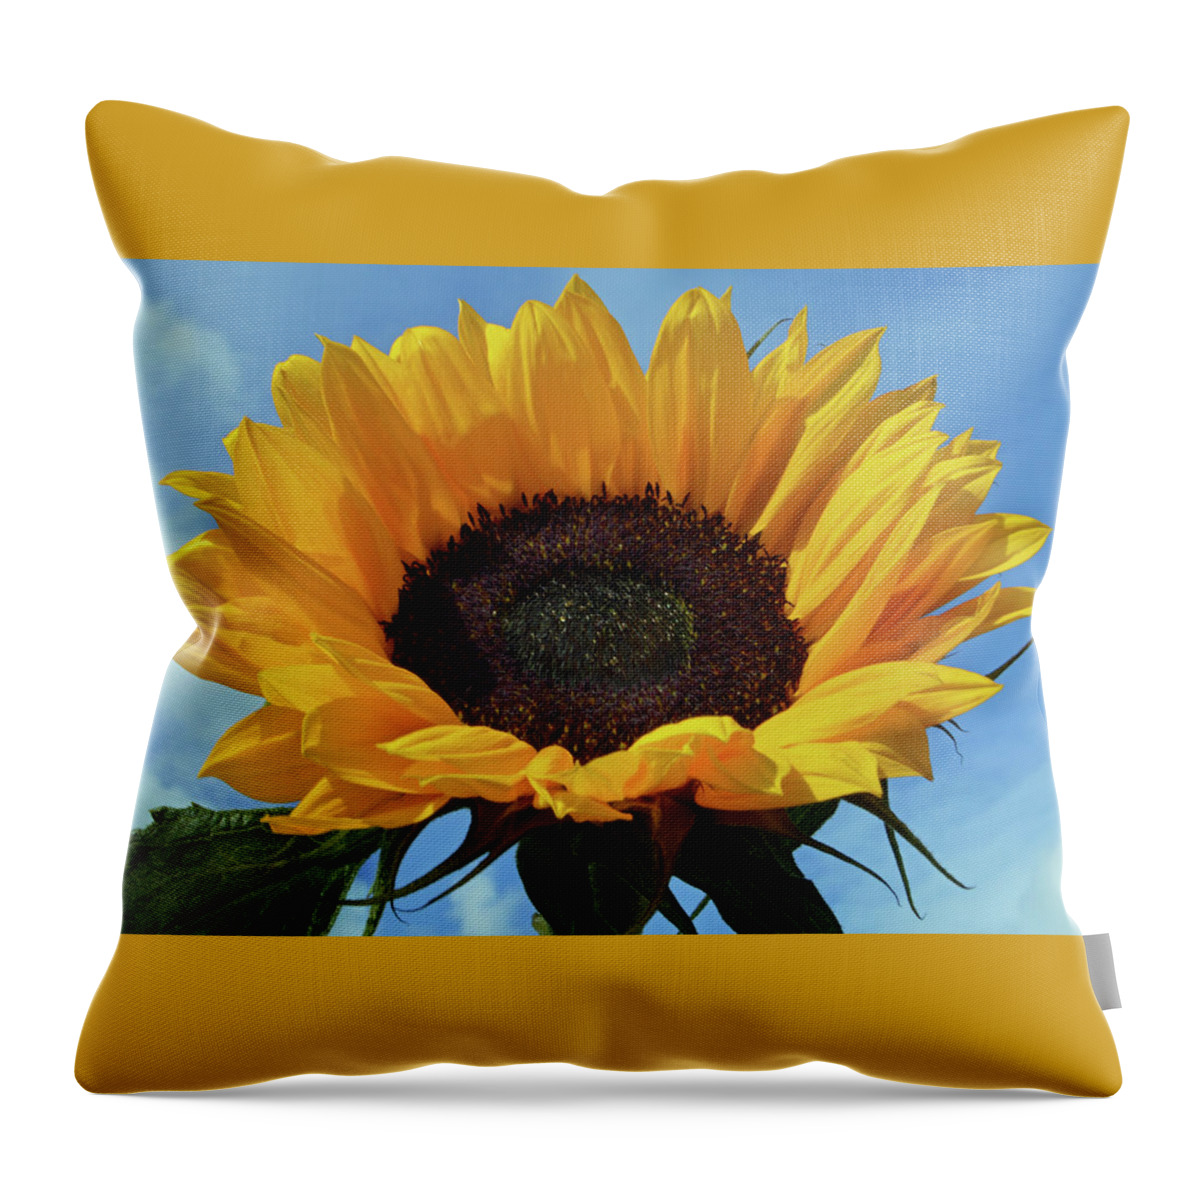 Sunflower Throw Pillow featuring the photograph Out In The Sunshine. by Terence Davis